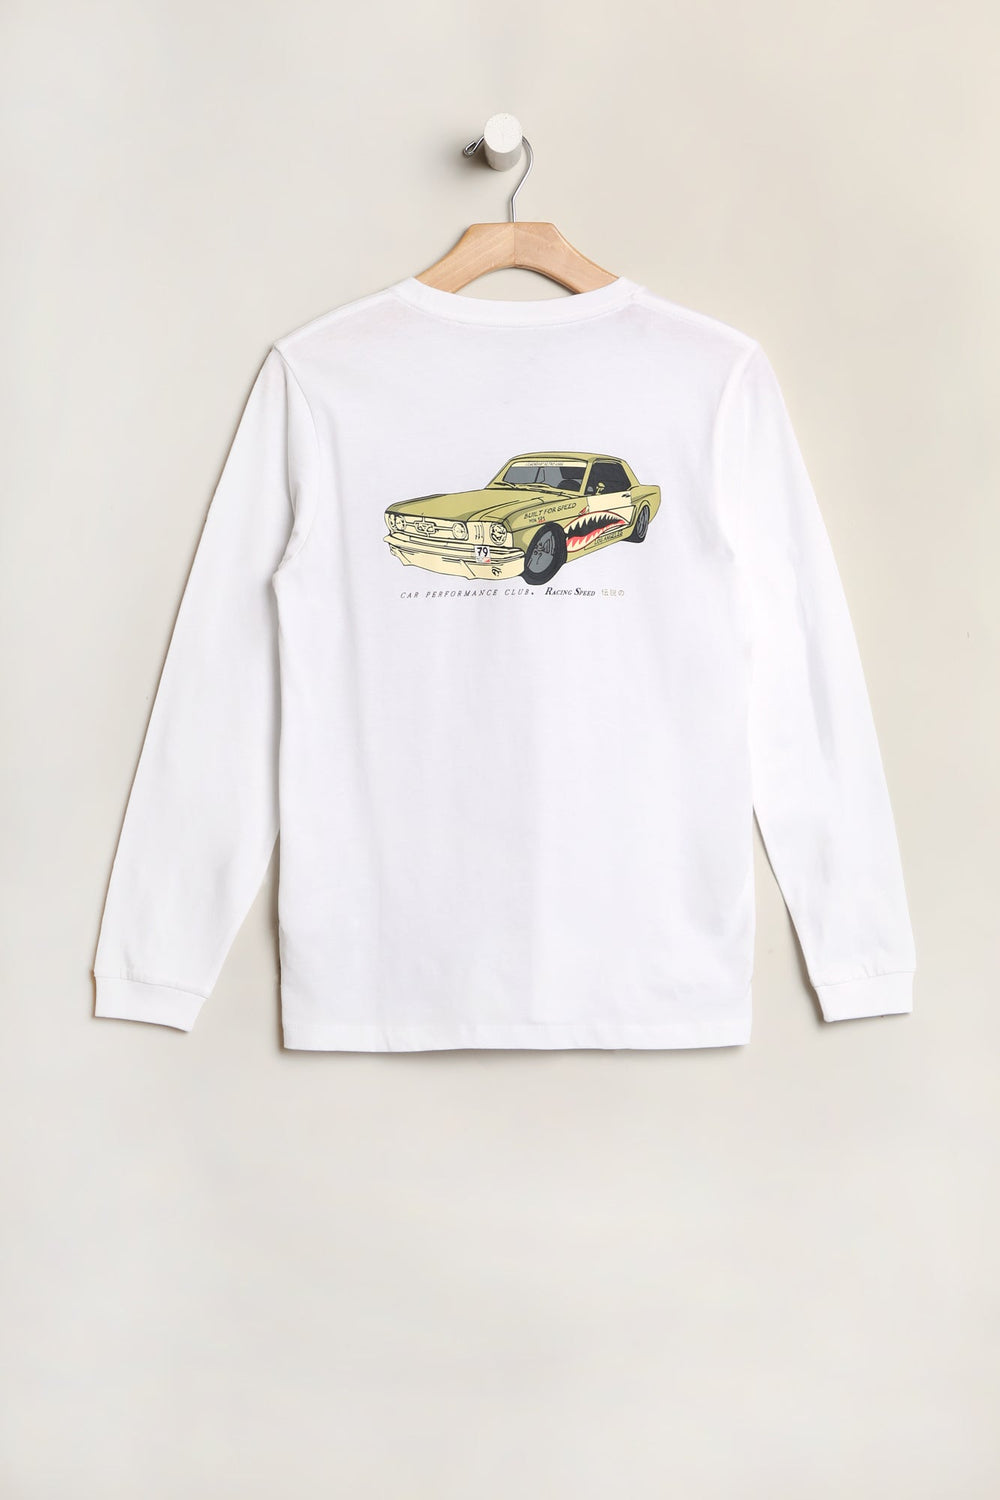 West49 Youth Car Graphic Long Sleeve Top White